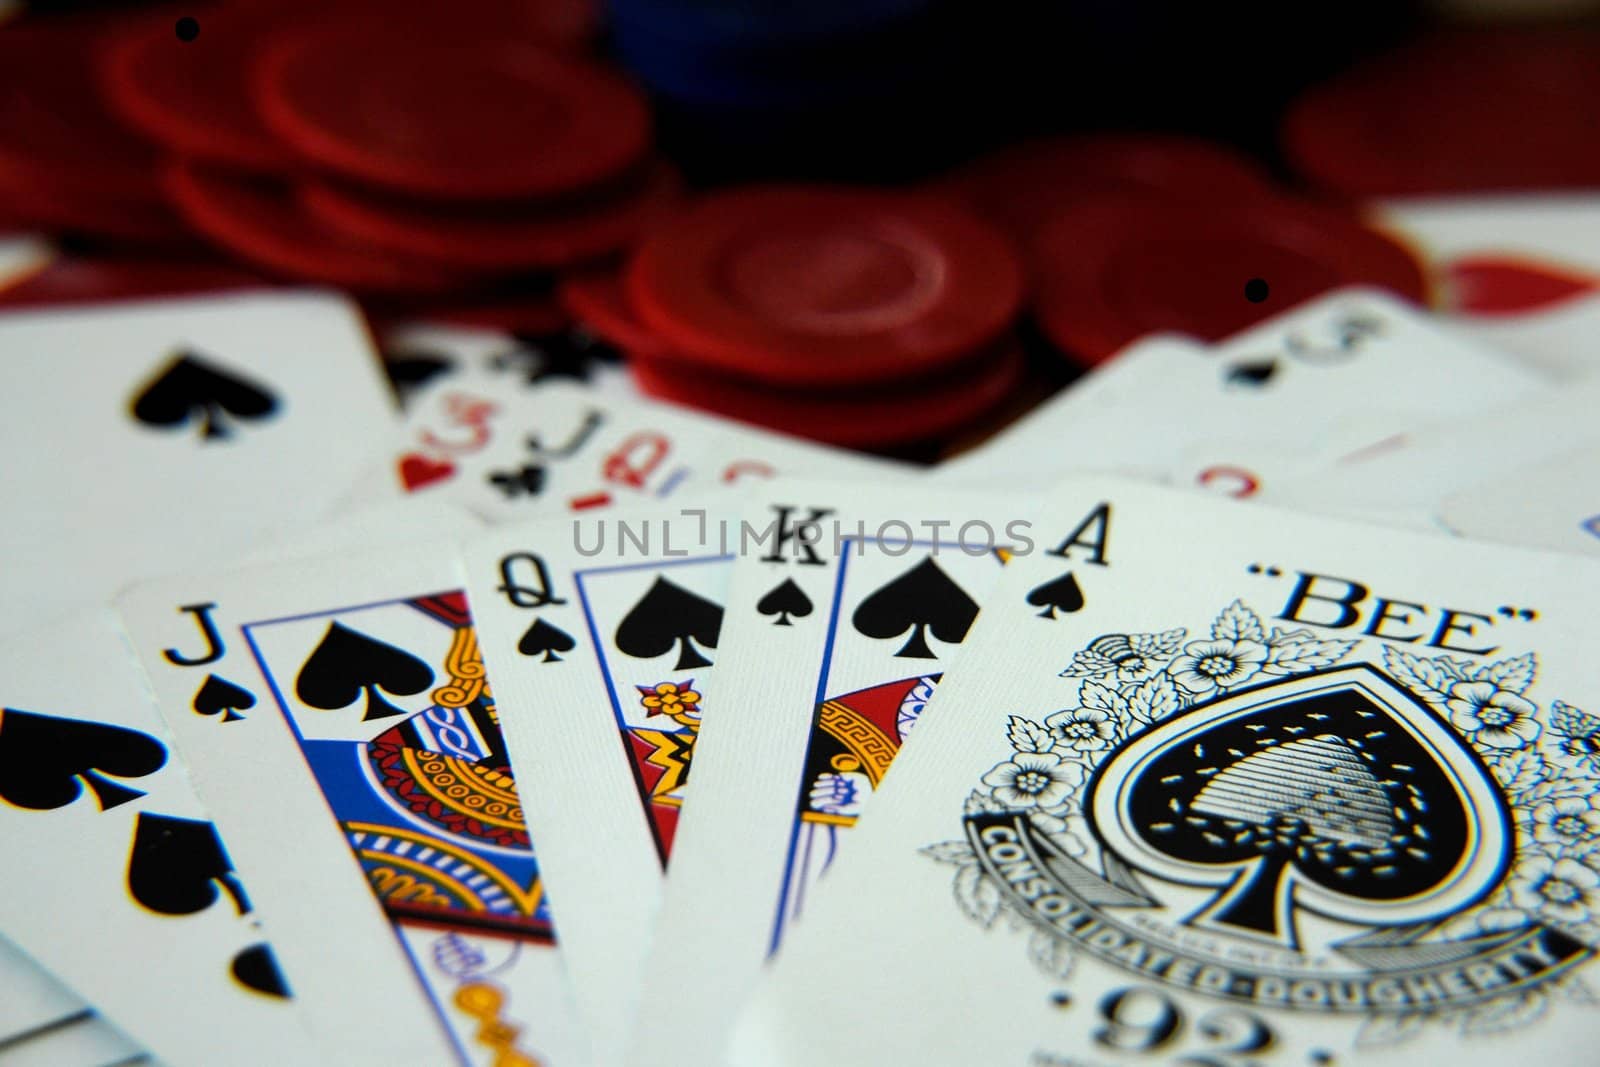 A royal flush poker hand shown face up over a pile of assorted cards and poker chips